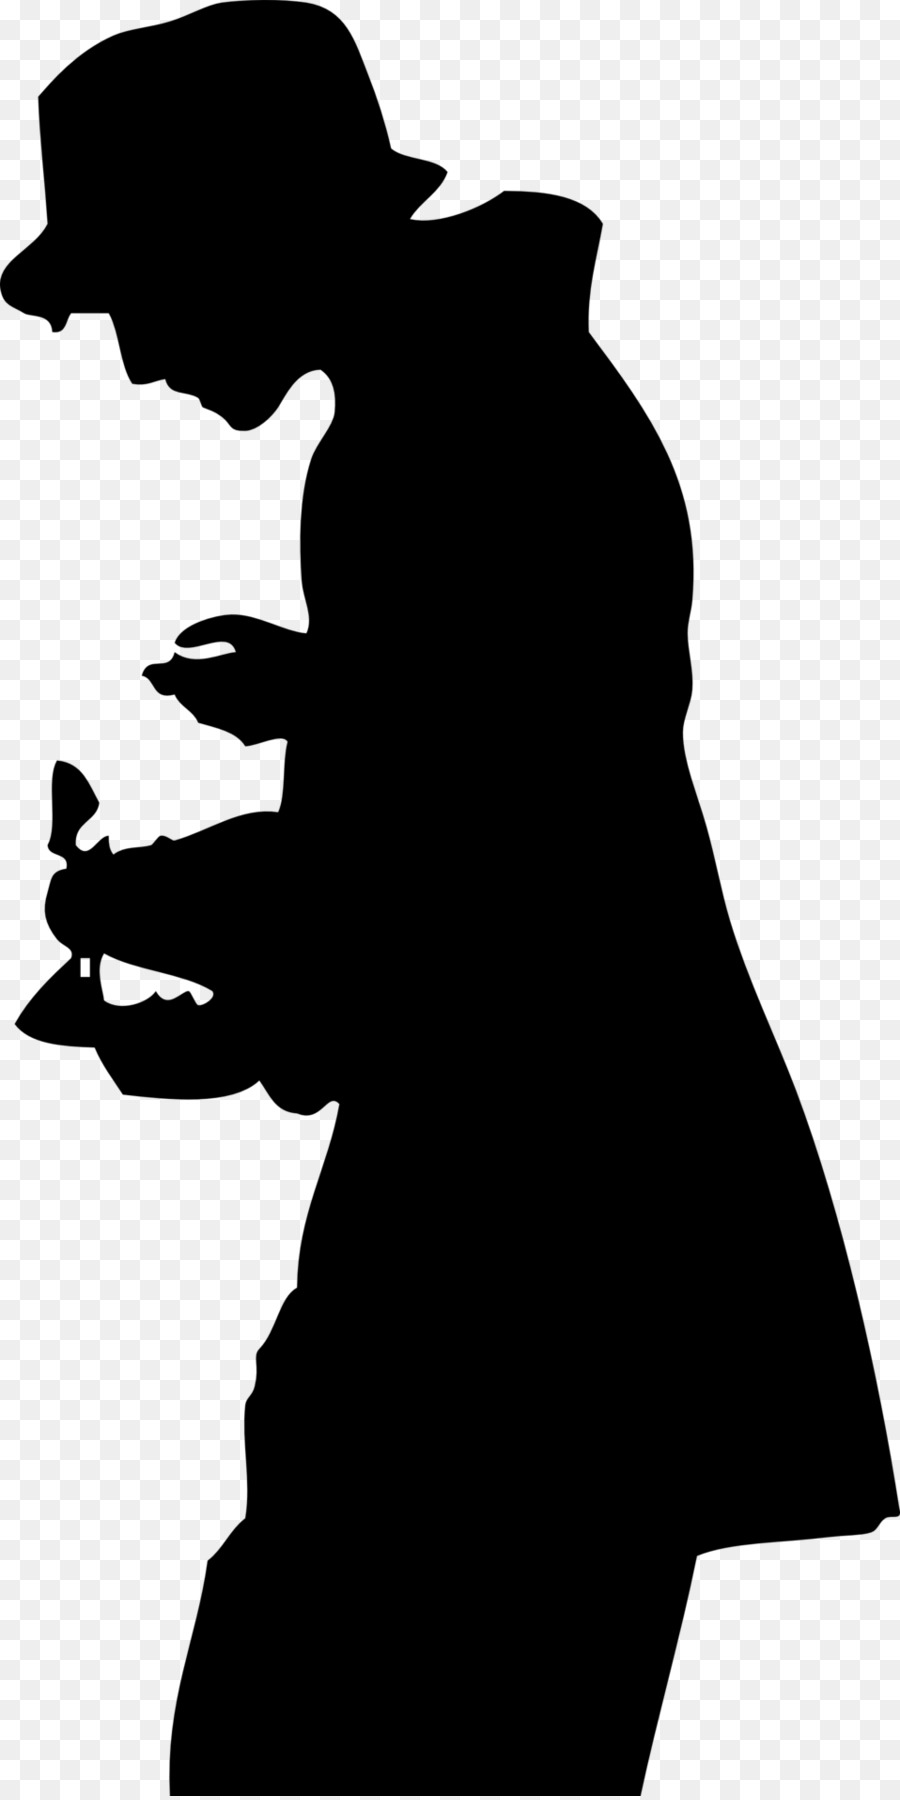 Silhouette Top hat Clip art - Silhouette png download - 958*1912 - Free Transparent Silhouette png Download.